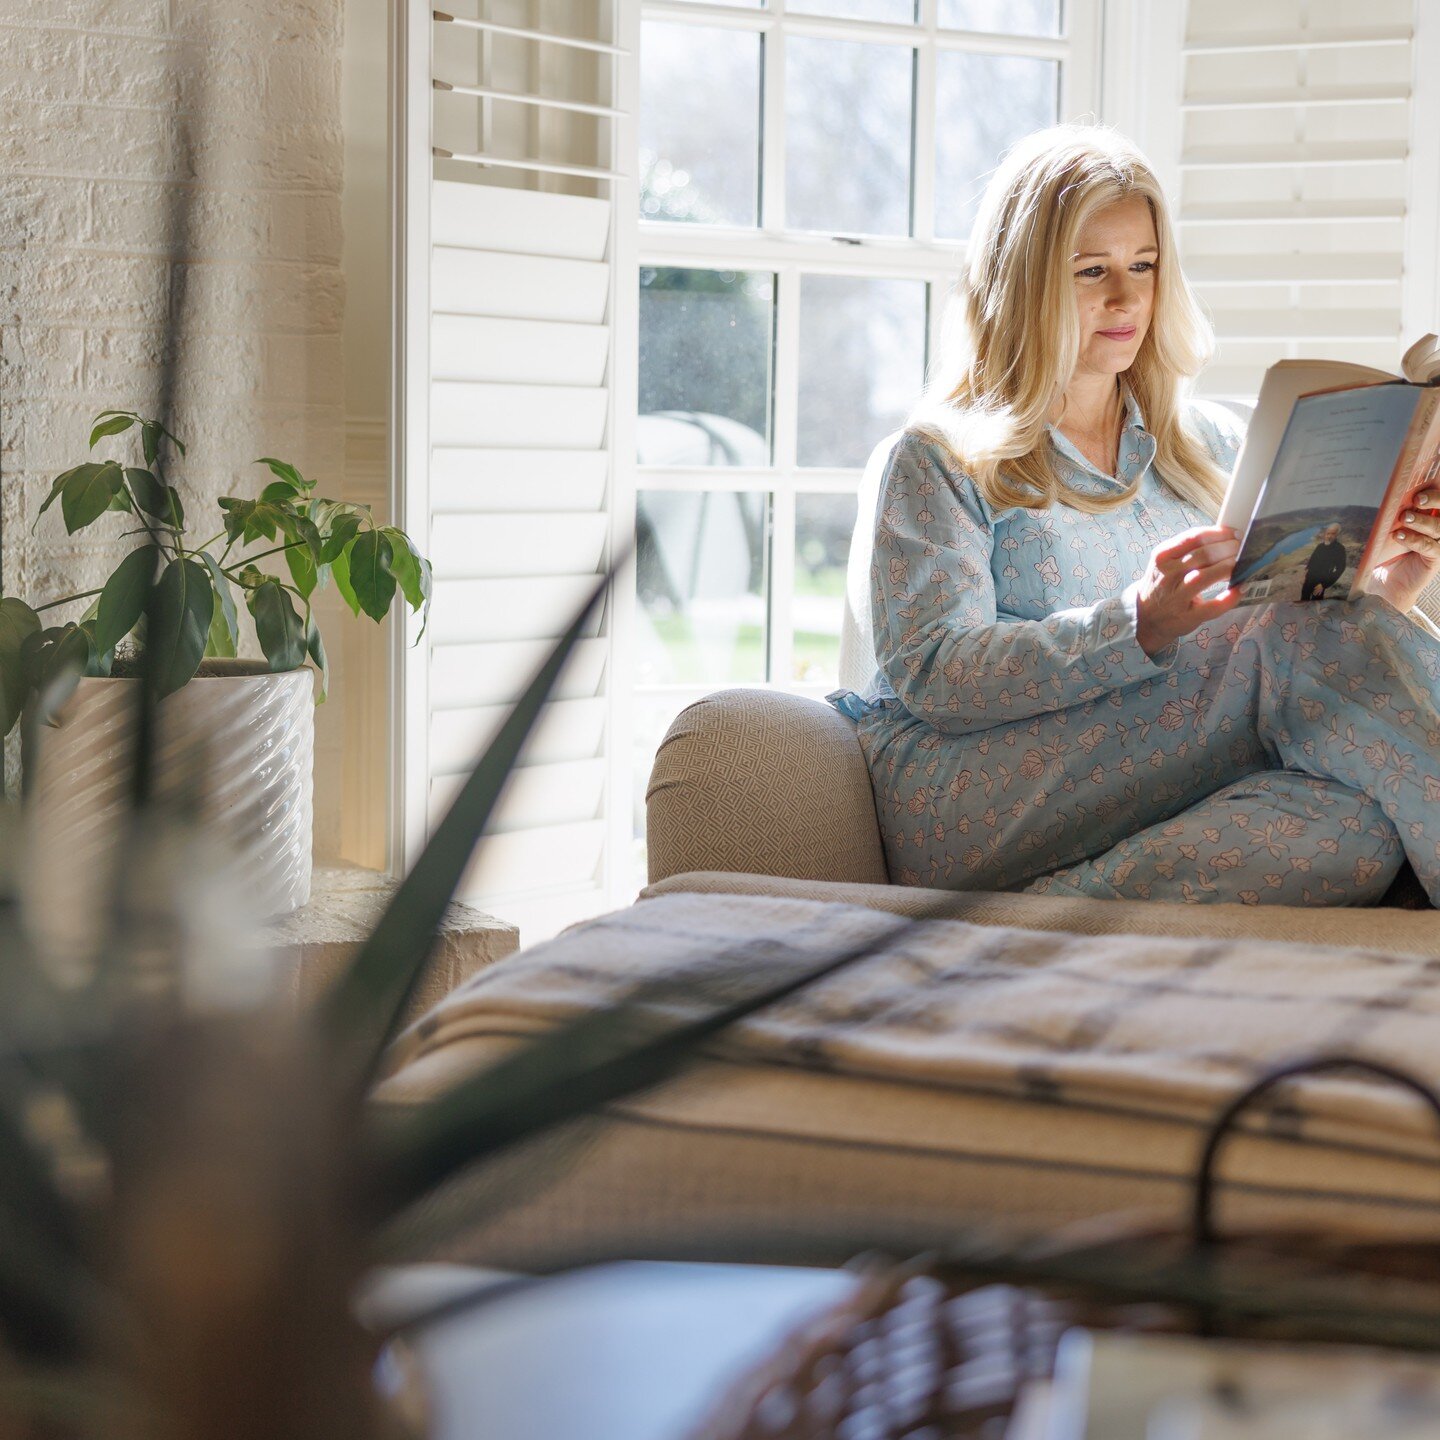 Indulge in the ultimate comfort experience with our 100% Hendley cotton pajamas! 😴📖 
Designed to keep you feeling cozy and cool, these pajamas are perfect for a lazy day spent reading your favorite book. 
With their premium cotton material, you can